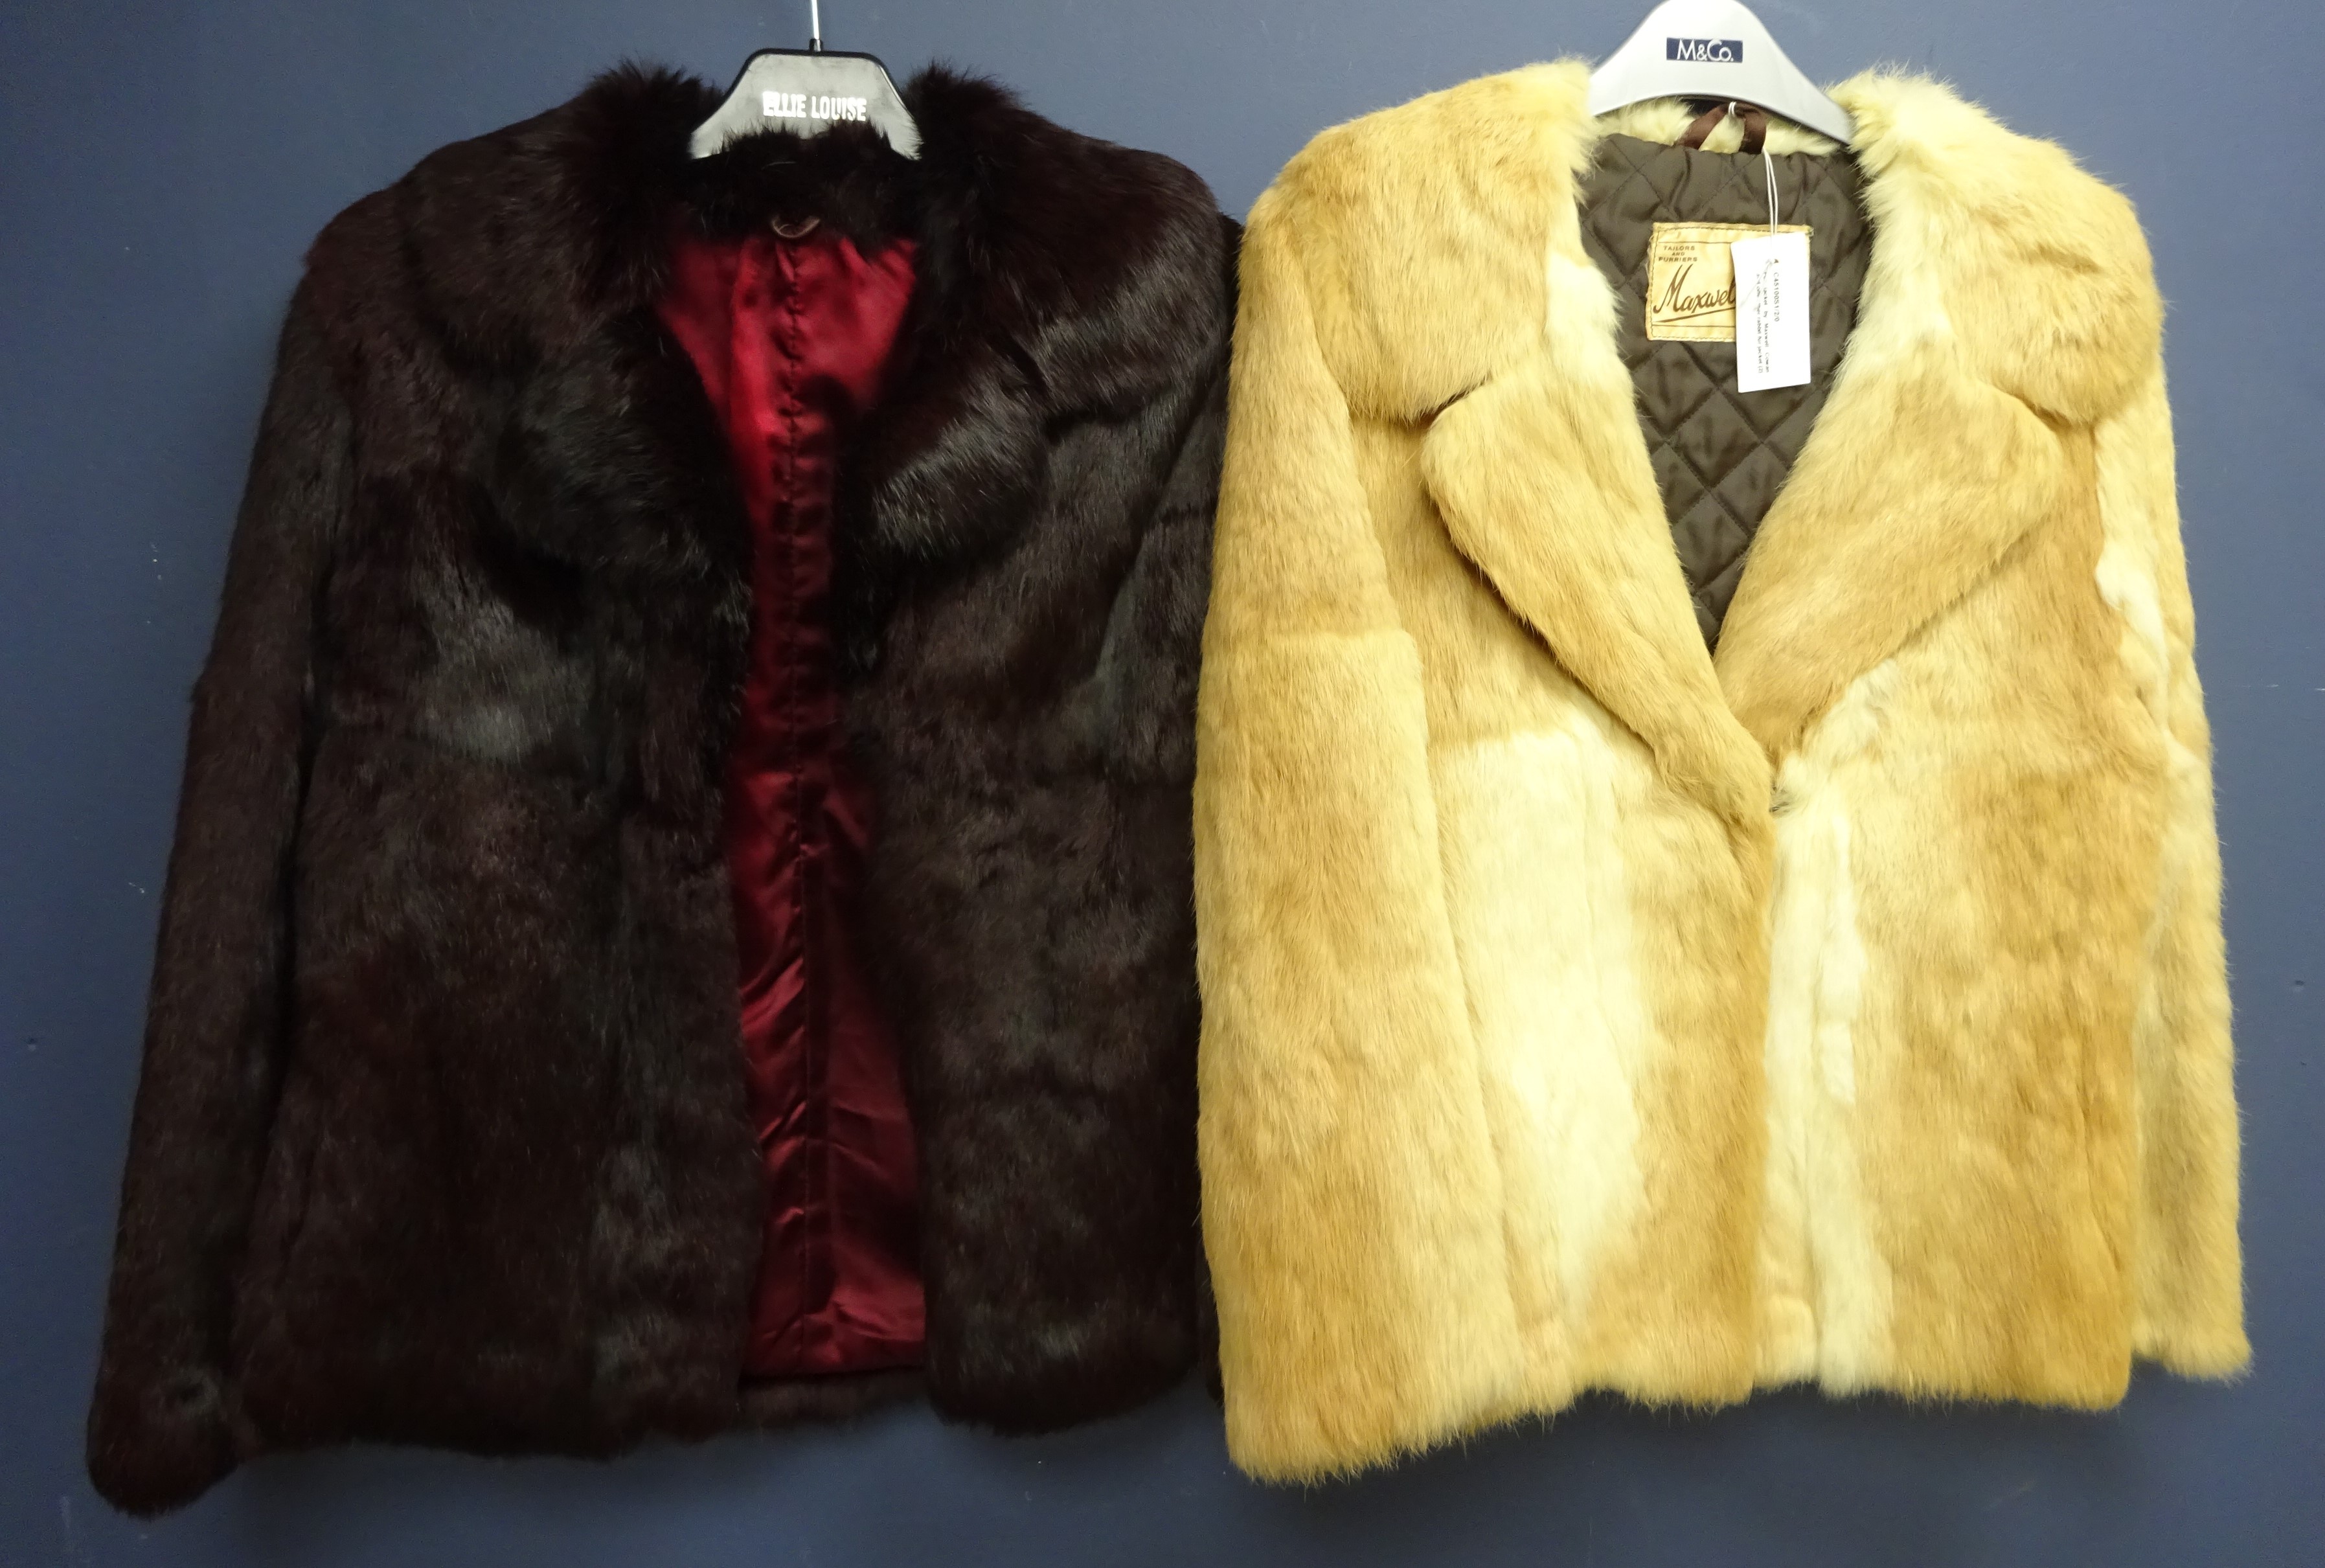 Clothing & Accessories - Fur jacket by Maxwell Cowan and one other rabbit fur jacket (2)